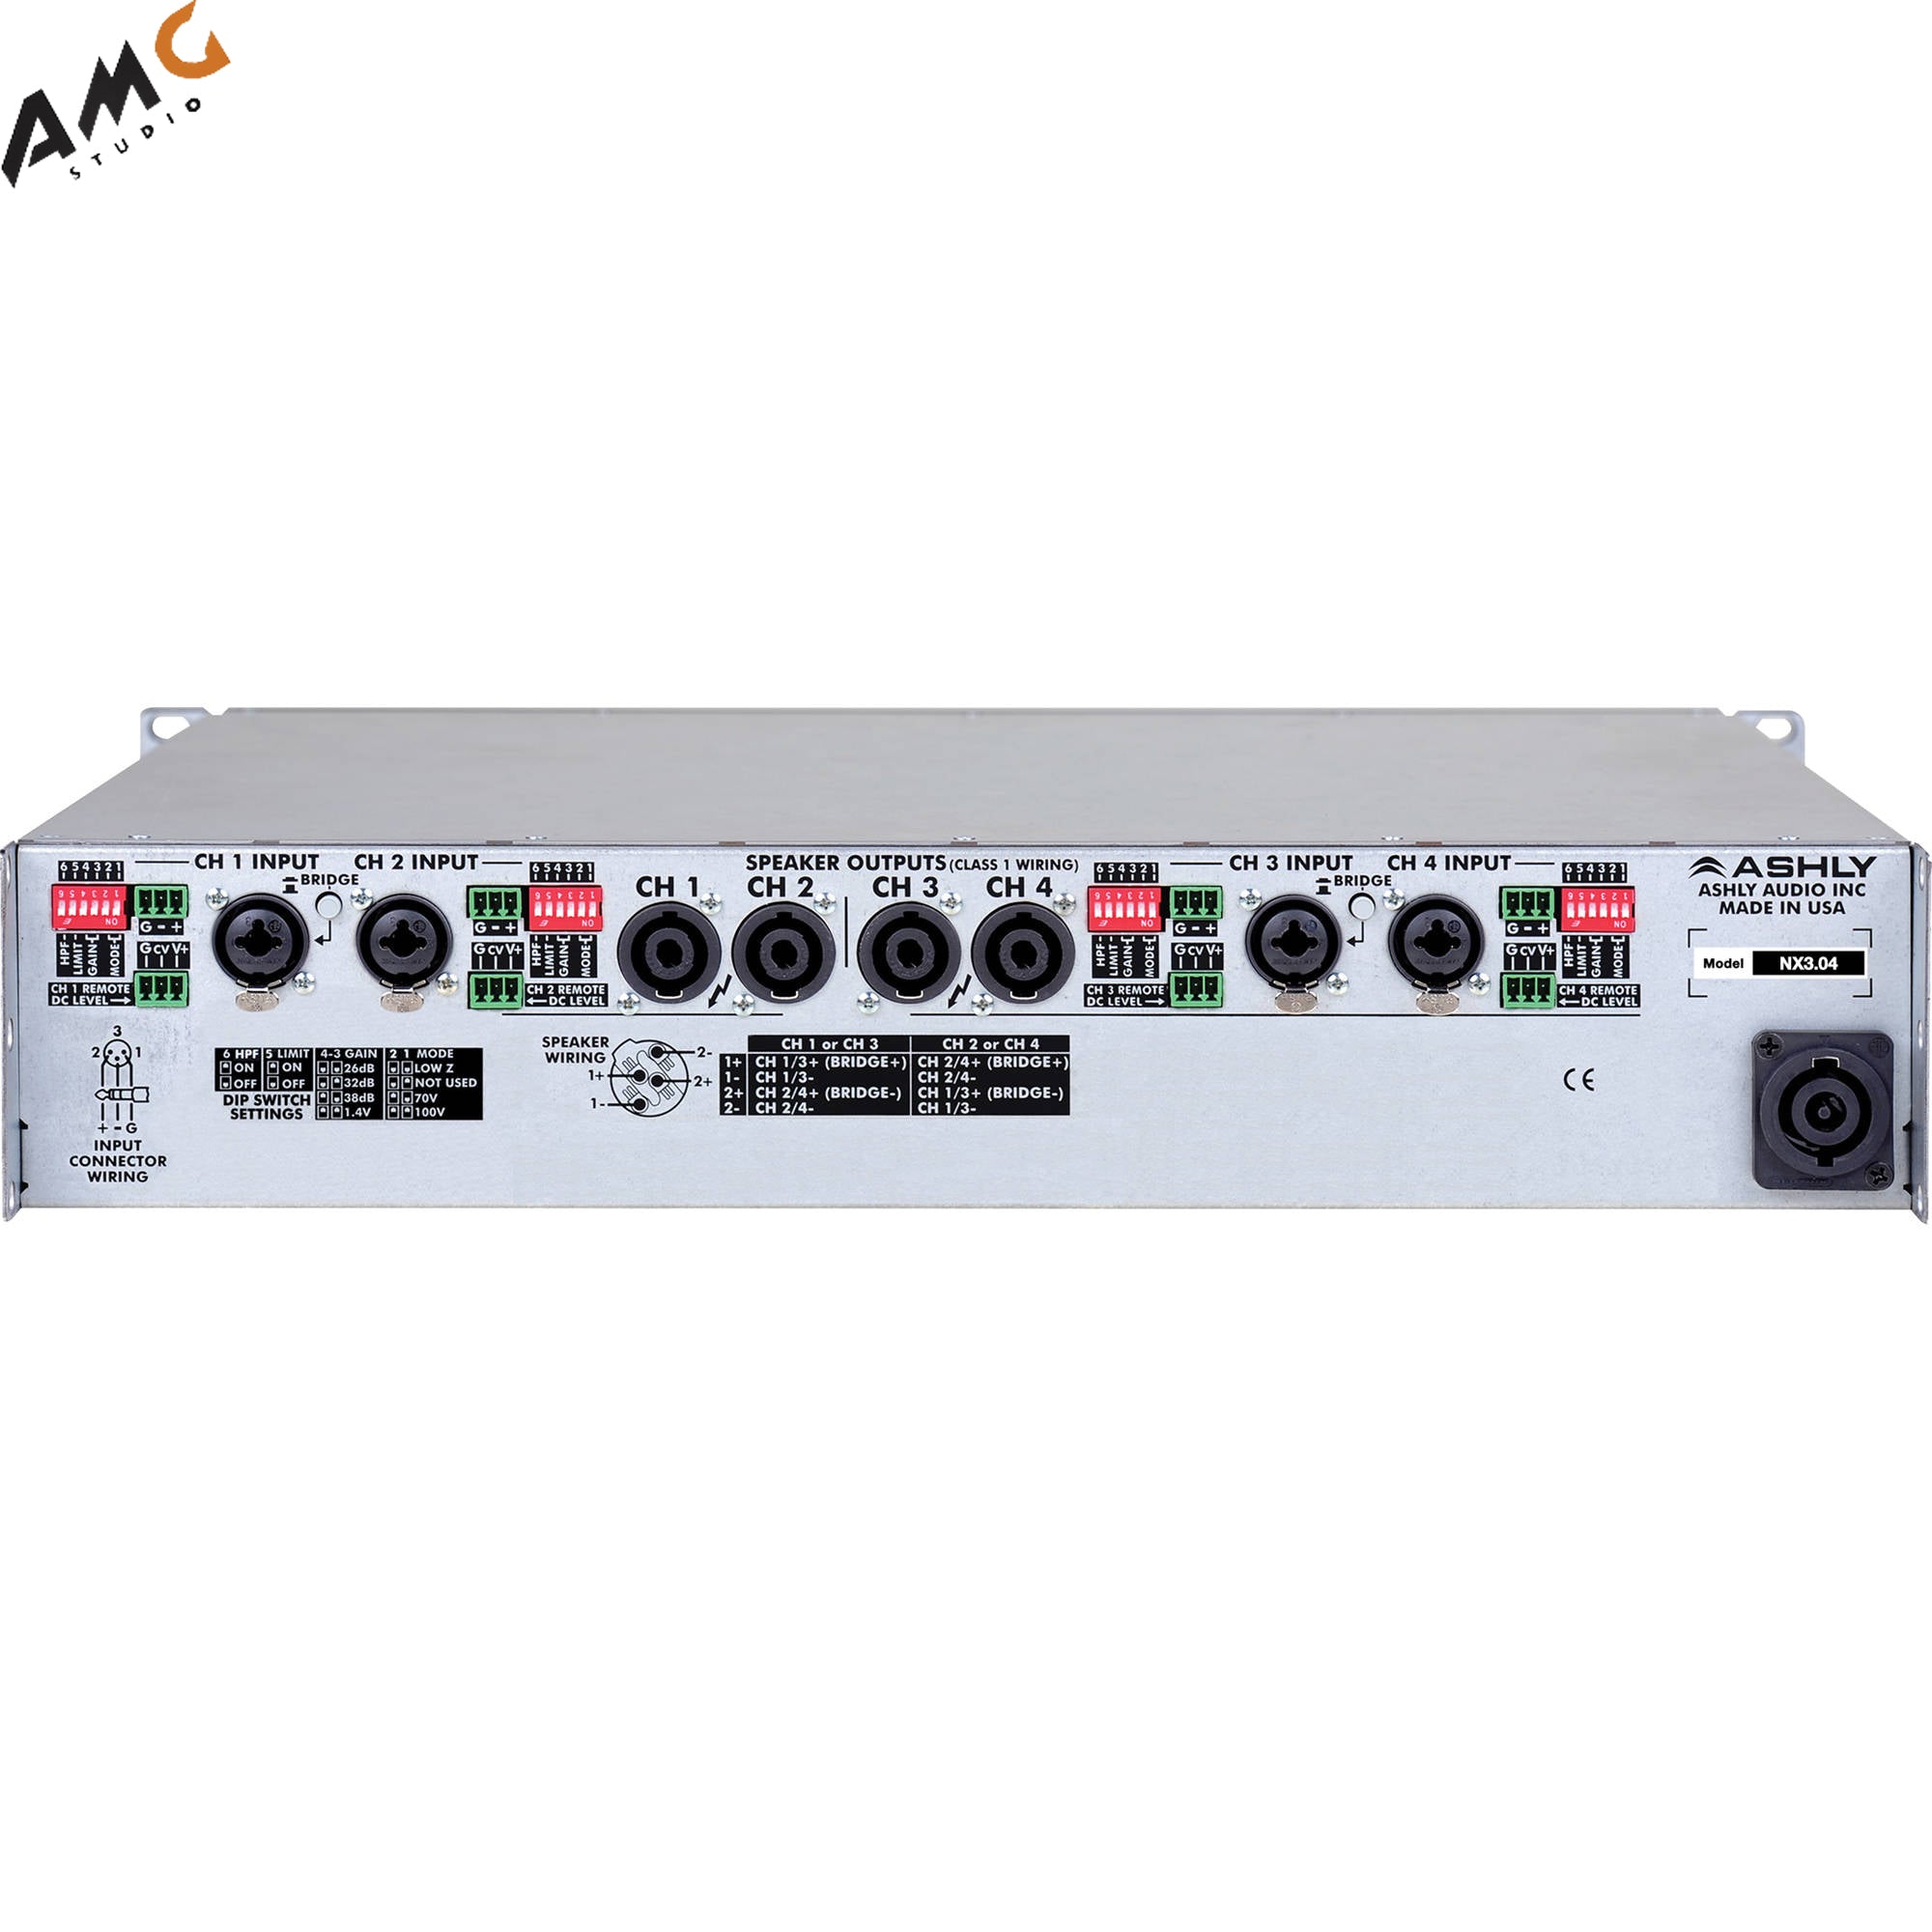 Ashly nX3.04 Power Amplifier 4 x 3000 Watts/2 Ohms with Programmable Outputs - Studio AMG